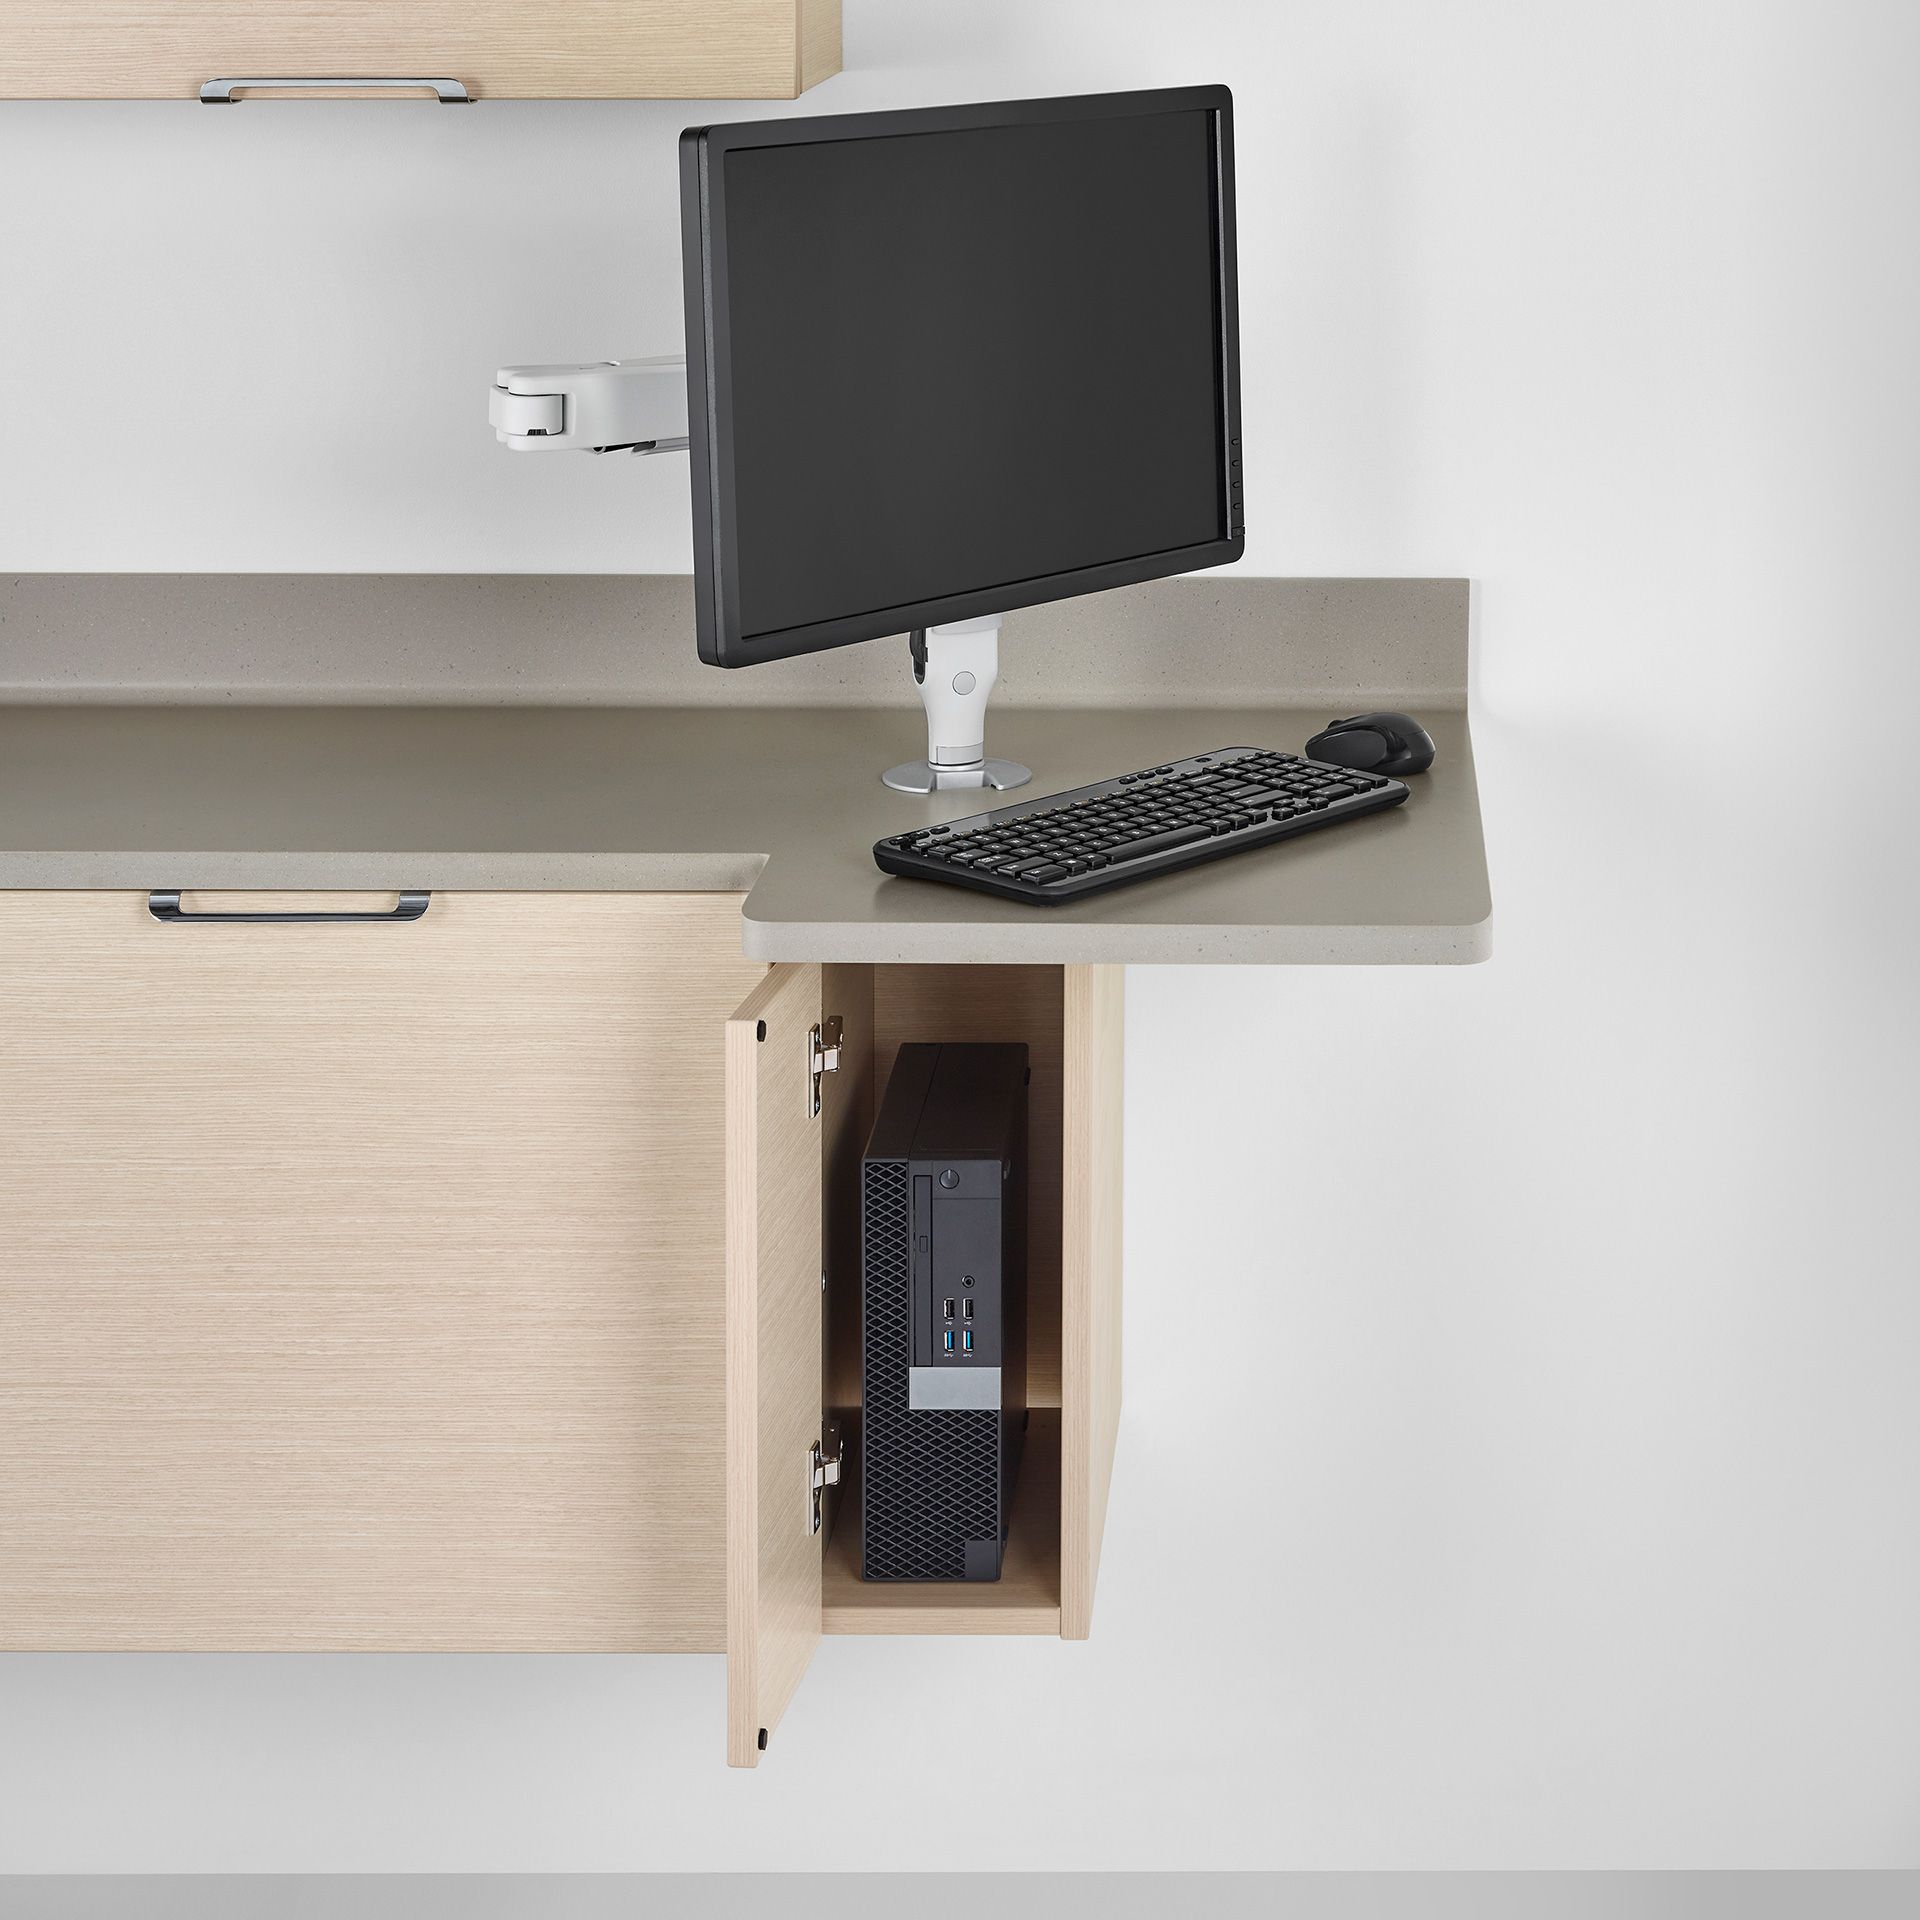 CABINET RANK: The seemingly limitless versatility of Herman Miller’s new Mora line